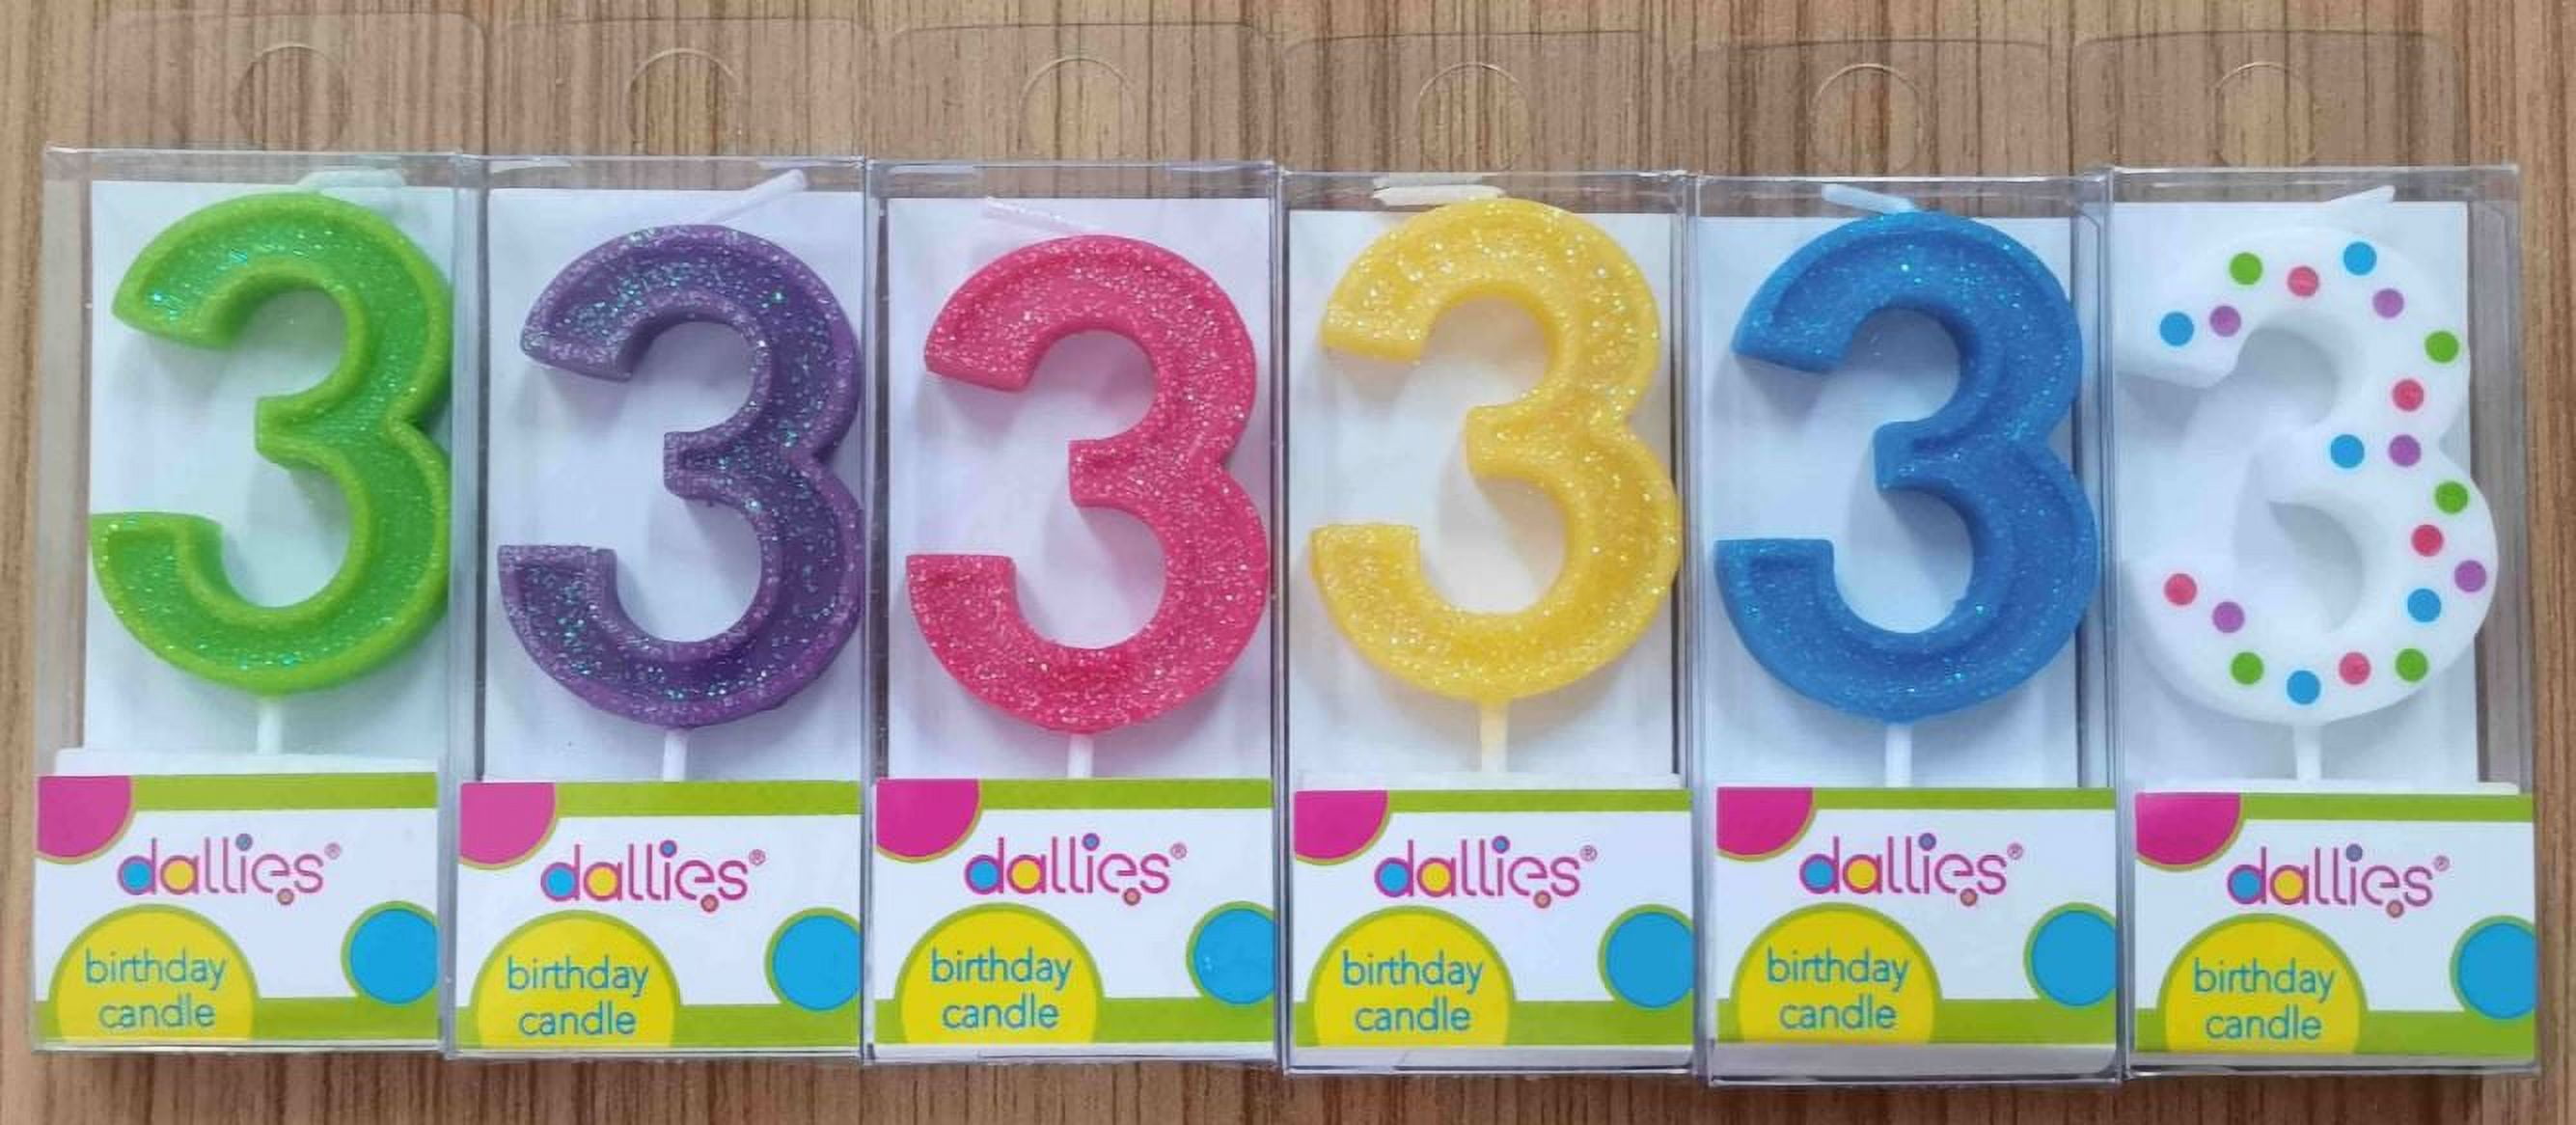 Dallies #3 Birthday Candle W/Pick, Assorted Colors with Polka Dots or  Glitter, 1.8 in, 1ct